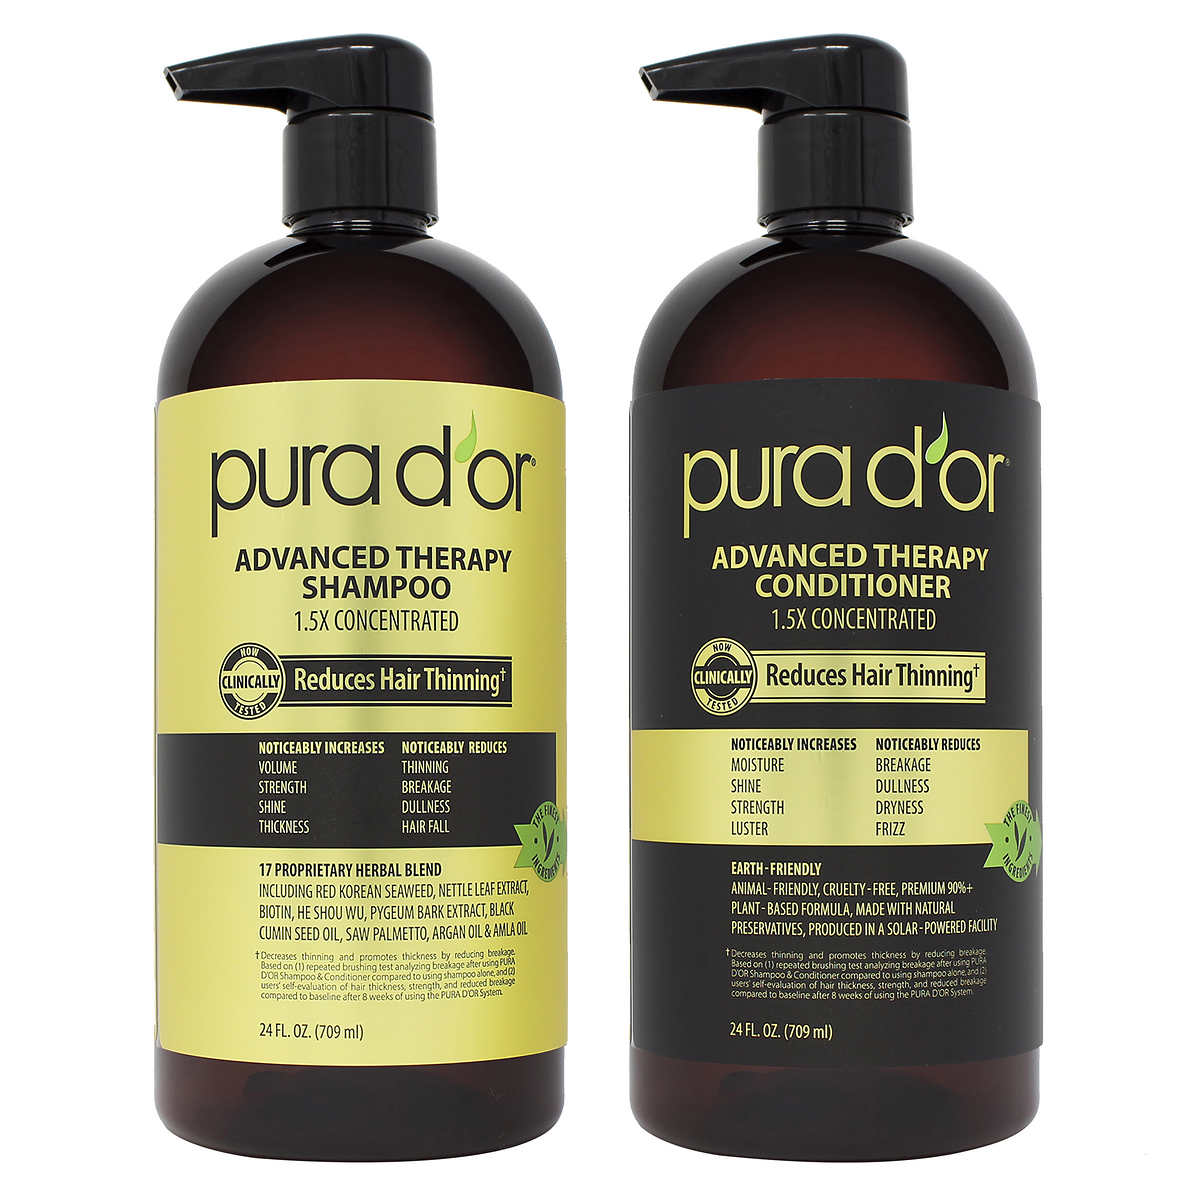 Pura d'or Advanced Therapy Anti-Hair Thinning Shampoo & Conditioner Duo